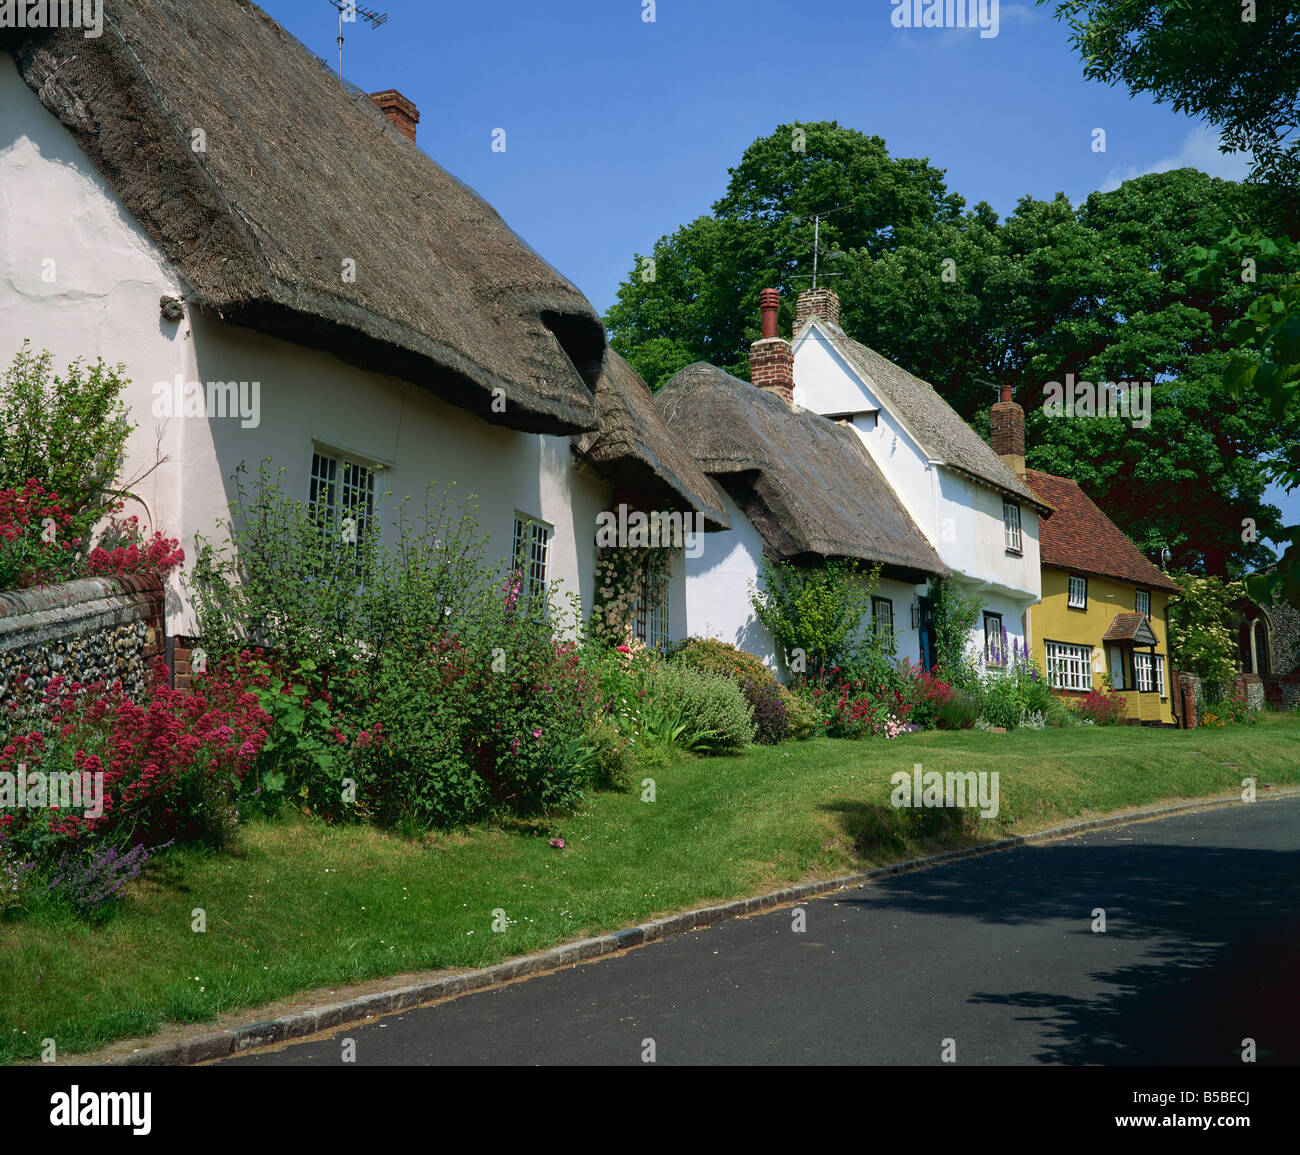 Cottages at Wendens Ambo, Essex, Angleterre, Europe Banque D'Images